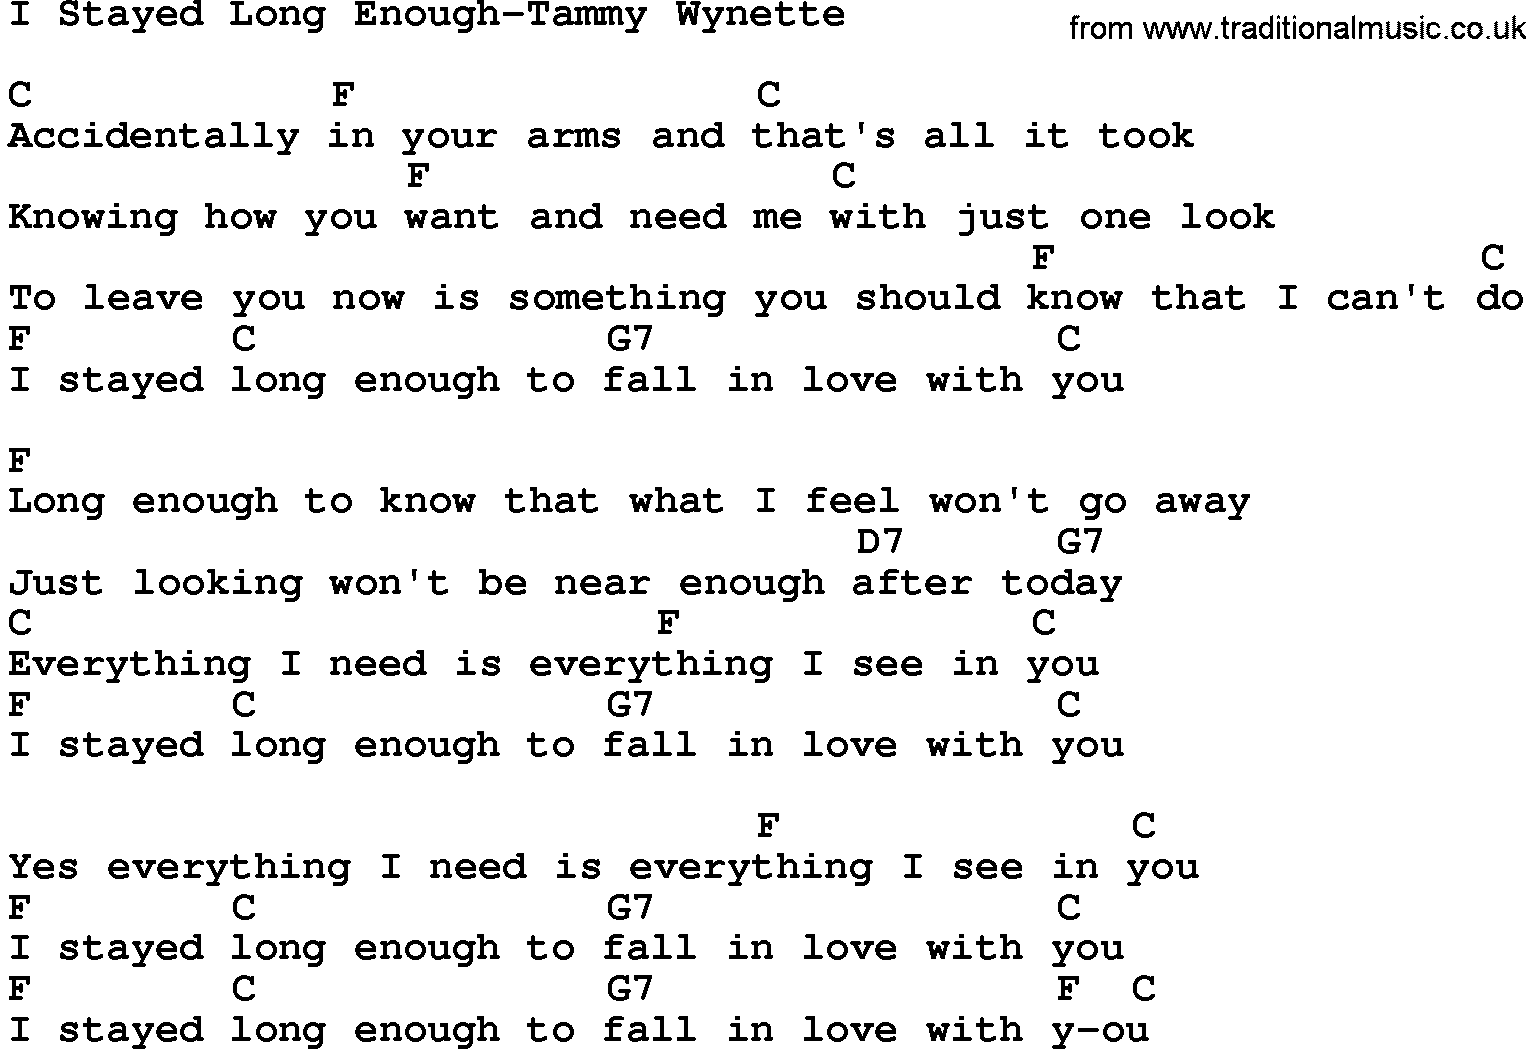 Country music song: I Stayed Long Enough-Tammy Wynette lyrics and chords